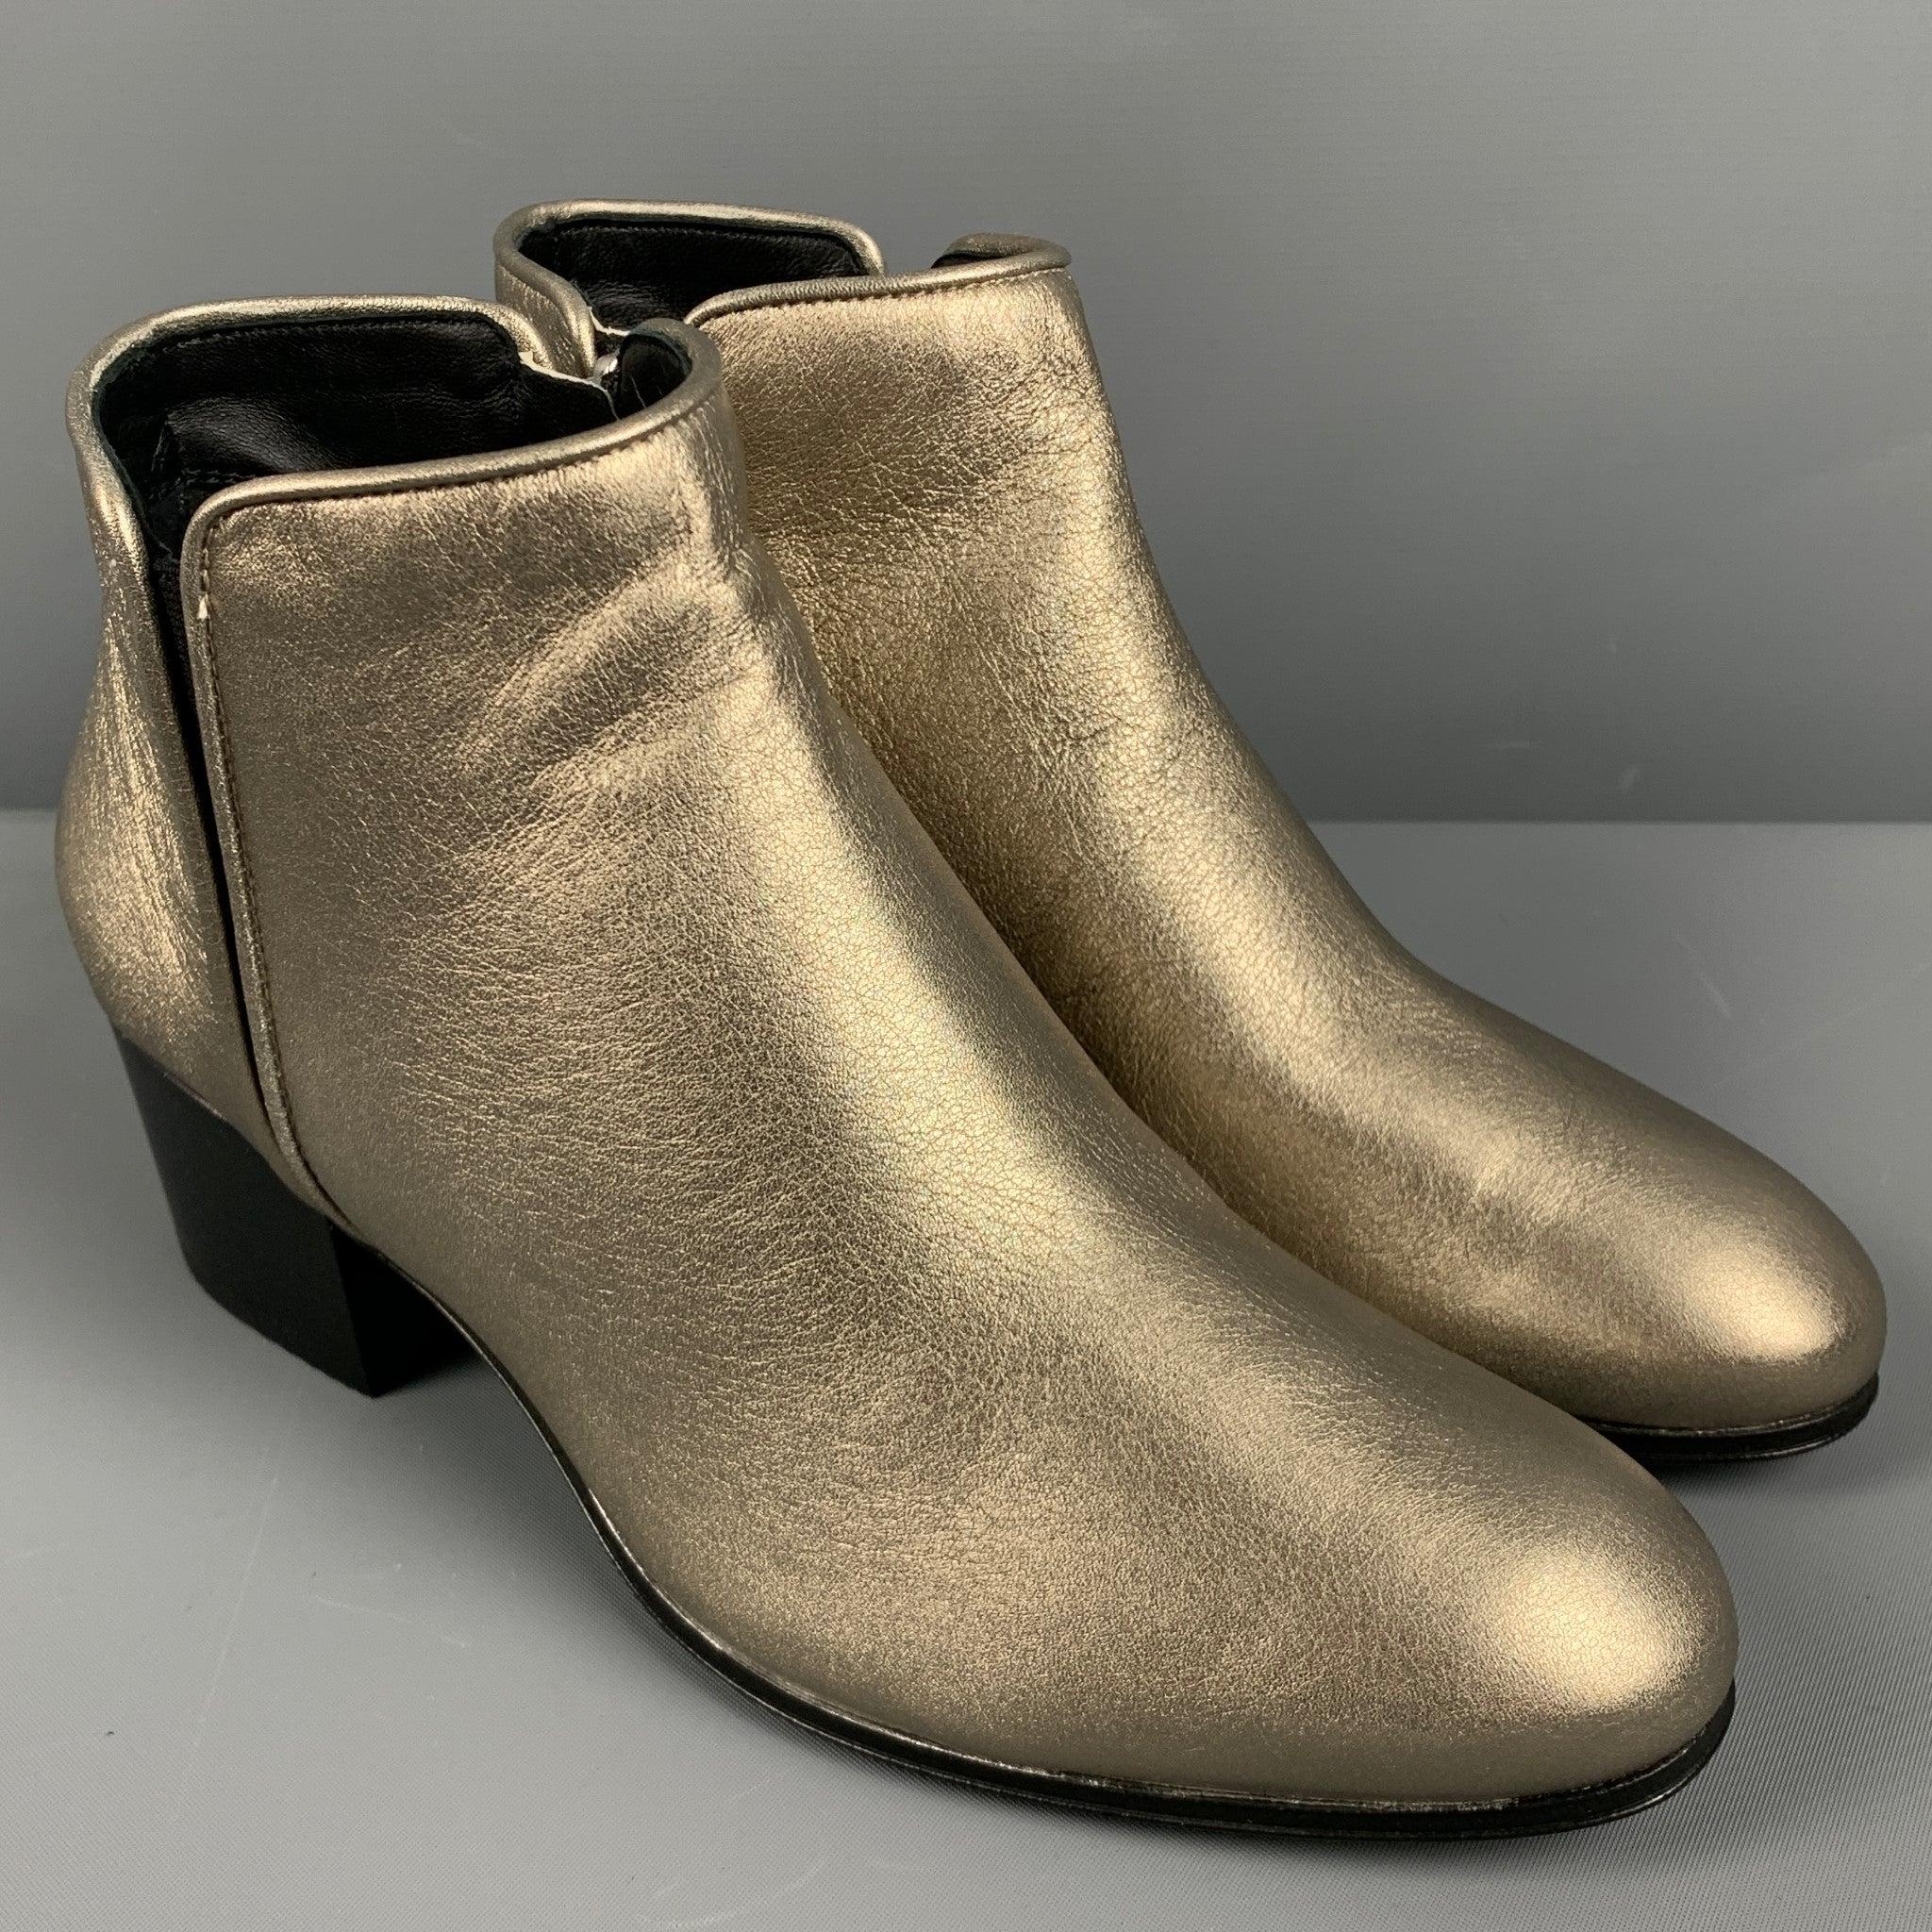 GIUSEPPE ZANOTTI boots
in a silver metallic leather featuring an ankle style, chunky heel, and side zipper closure. Comes with box and dust bag.New with Box. 

Marked:   35 

Measurements: 
  Length: 9 inches Width: 3 inches Height: 5.25 inches 
  
